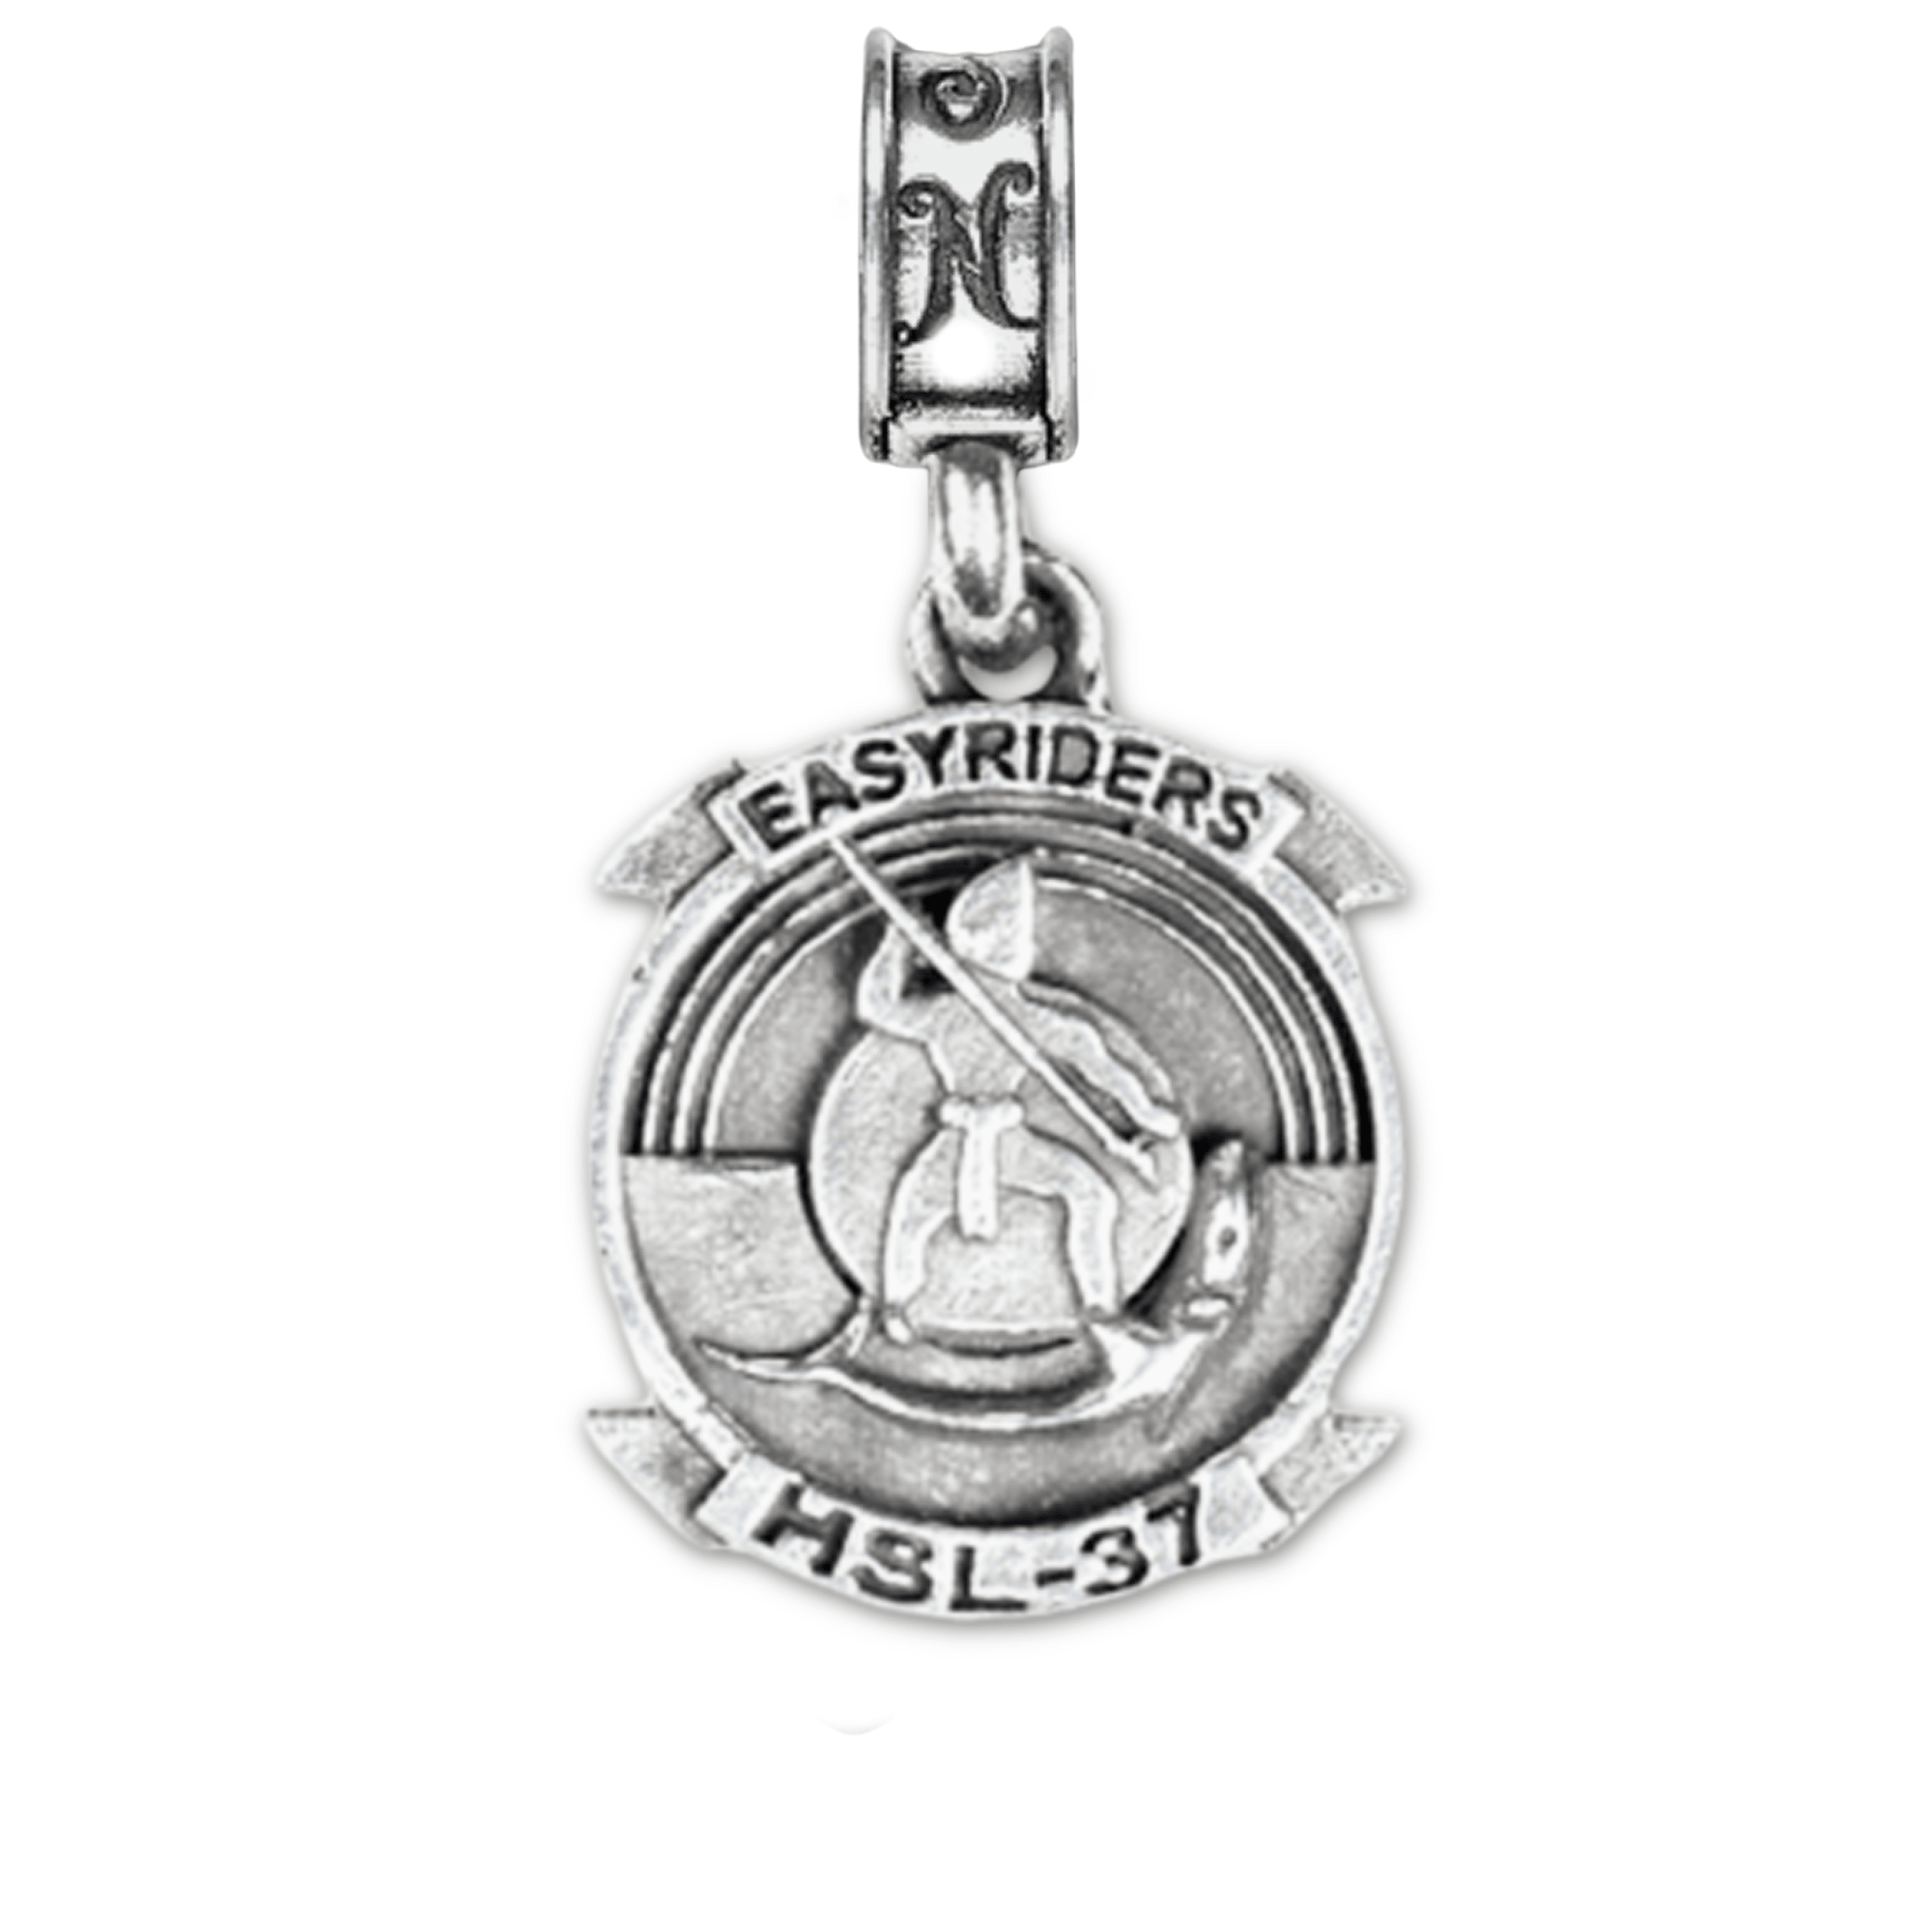 Military Jewelry, Military Charms, Navy, USN, Military Gifts, HSL-37 Easyriders